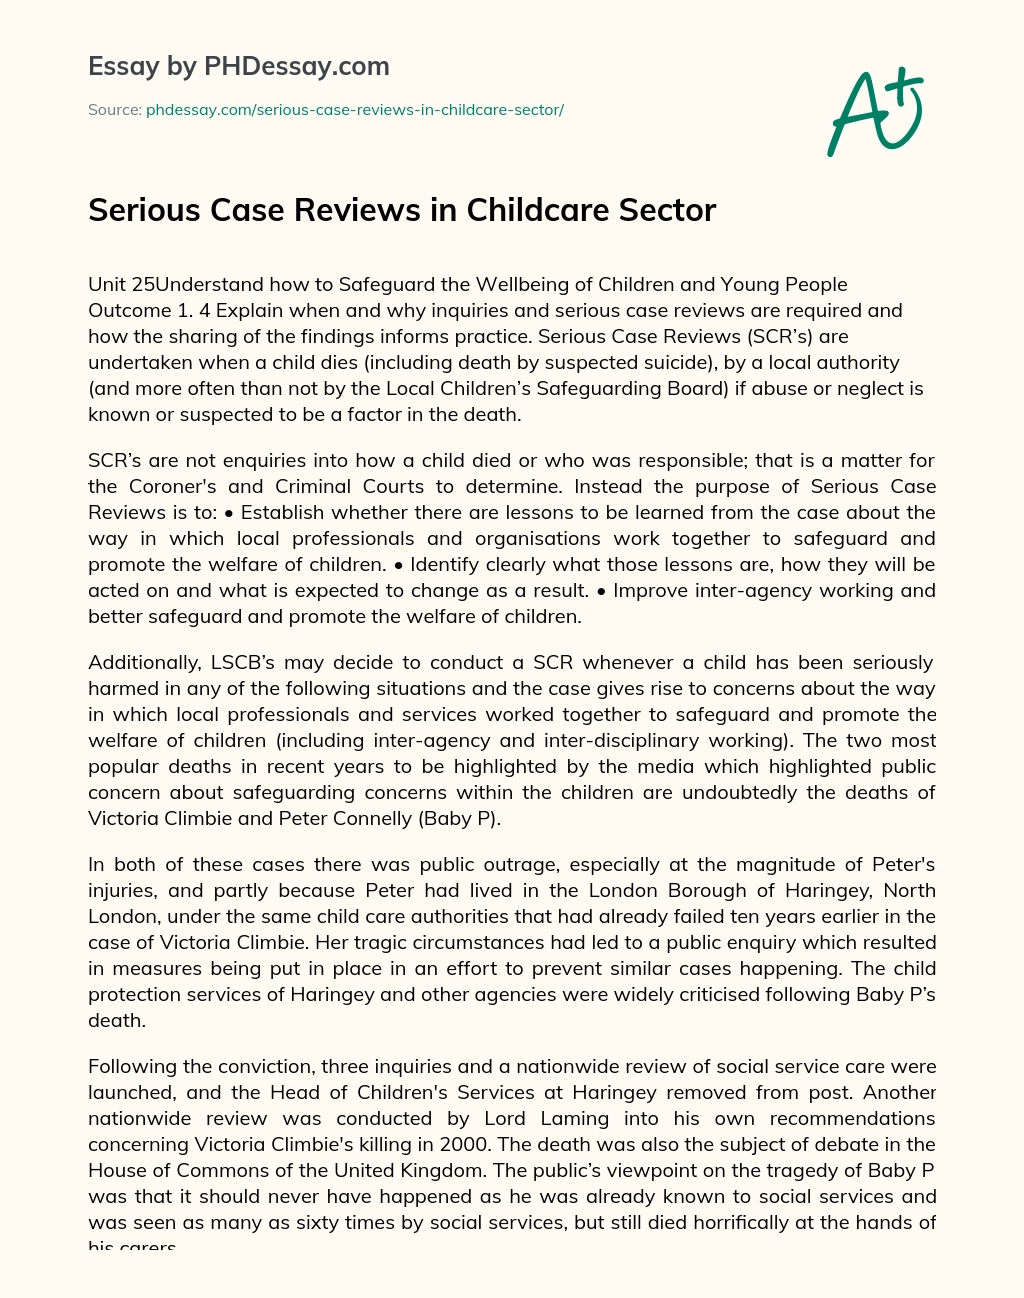 Serious Case Reviews in Childcare Sector essay